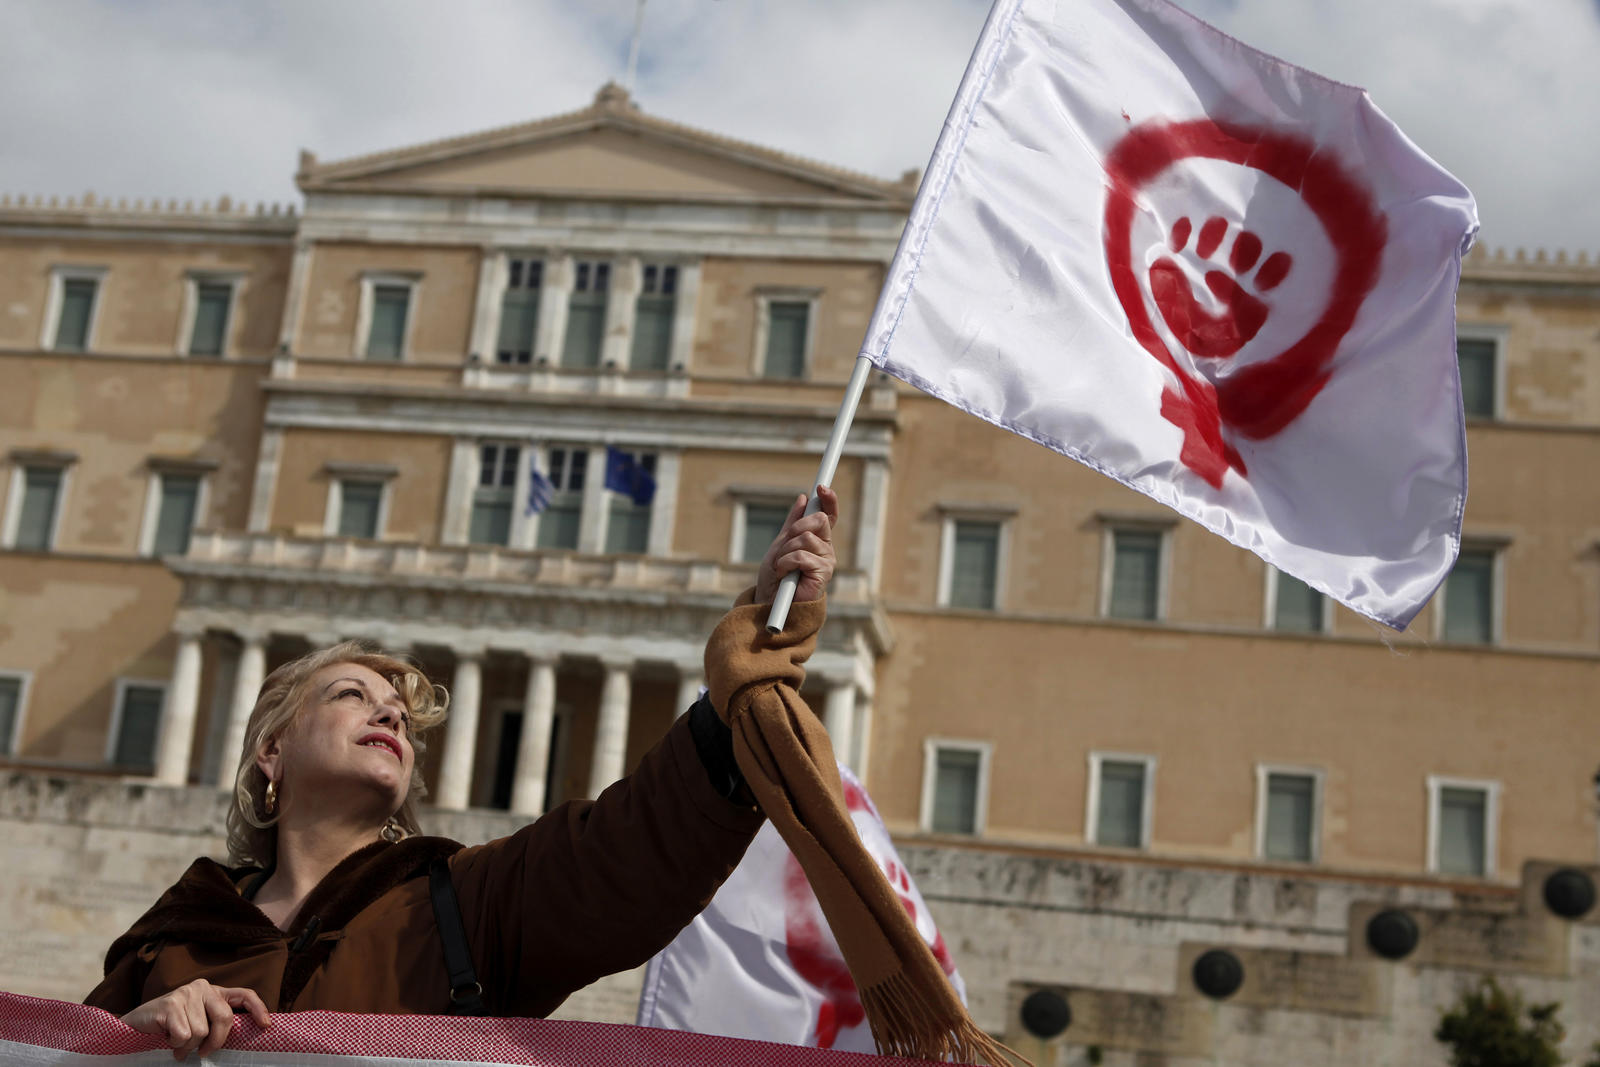 A woman waves a flag depicting a symbol of feminism during a march to celebrate International Women’s Day in Athens